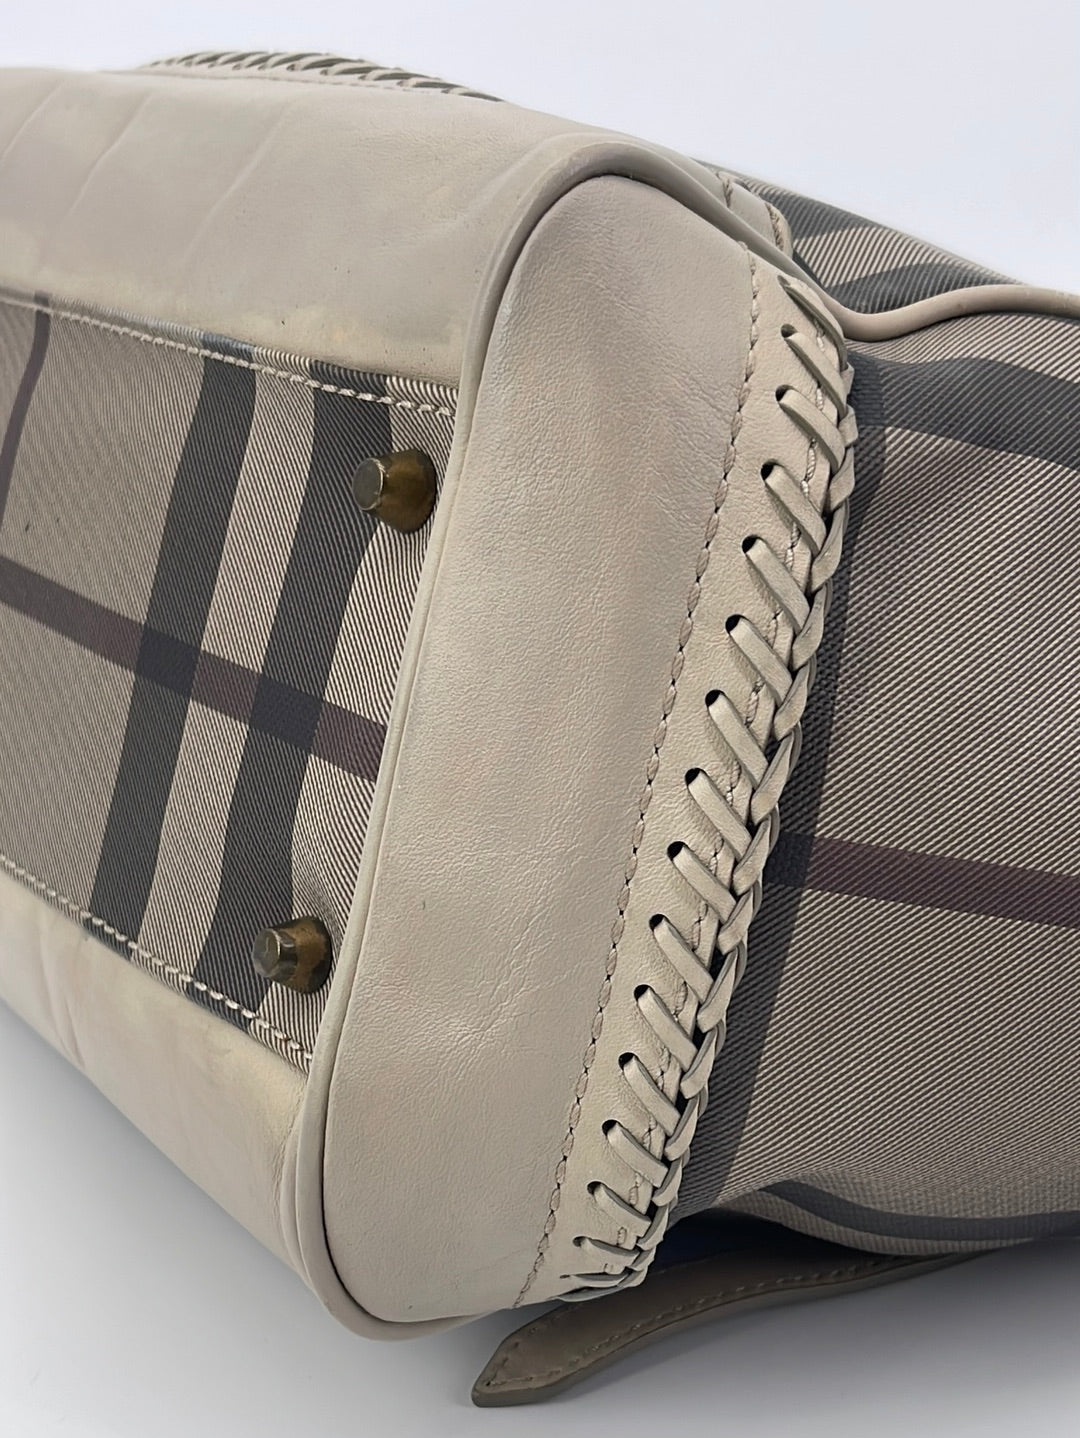 Authentic BURBERRY Beige Smoked Check Tote Bag